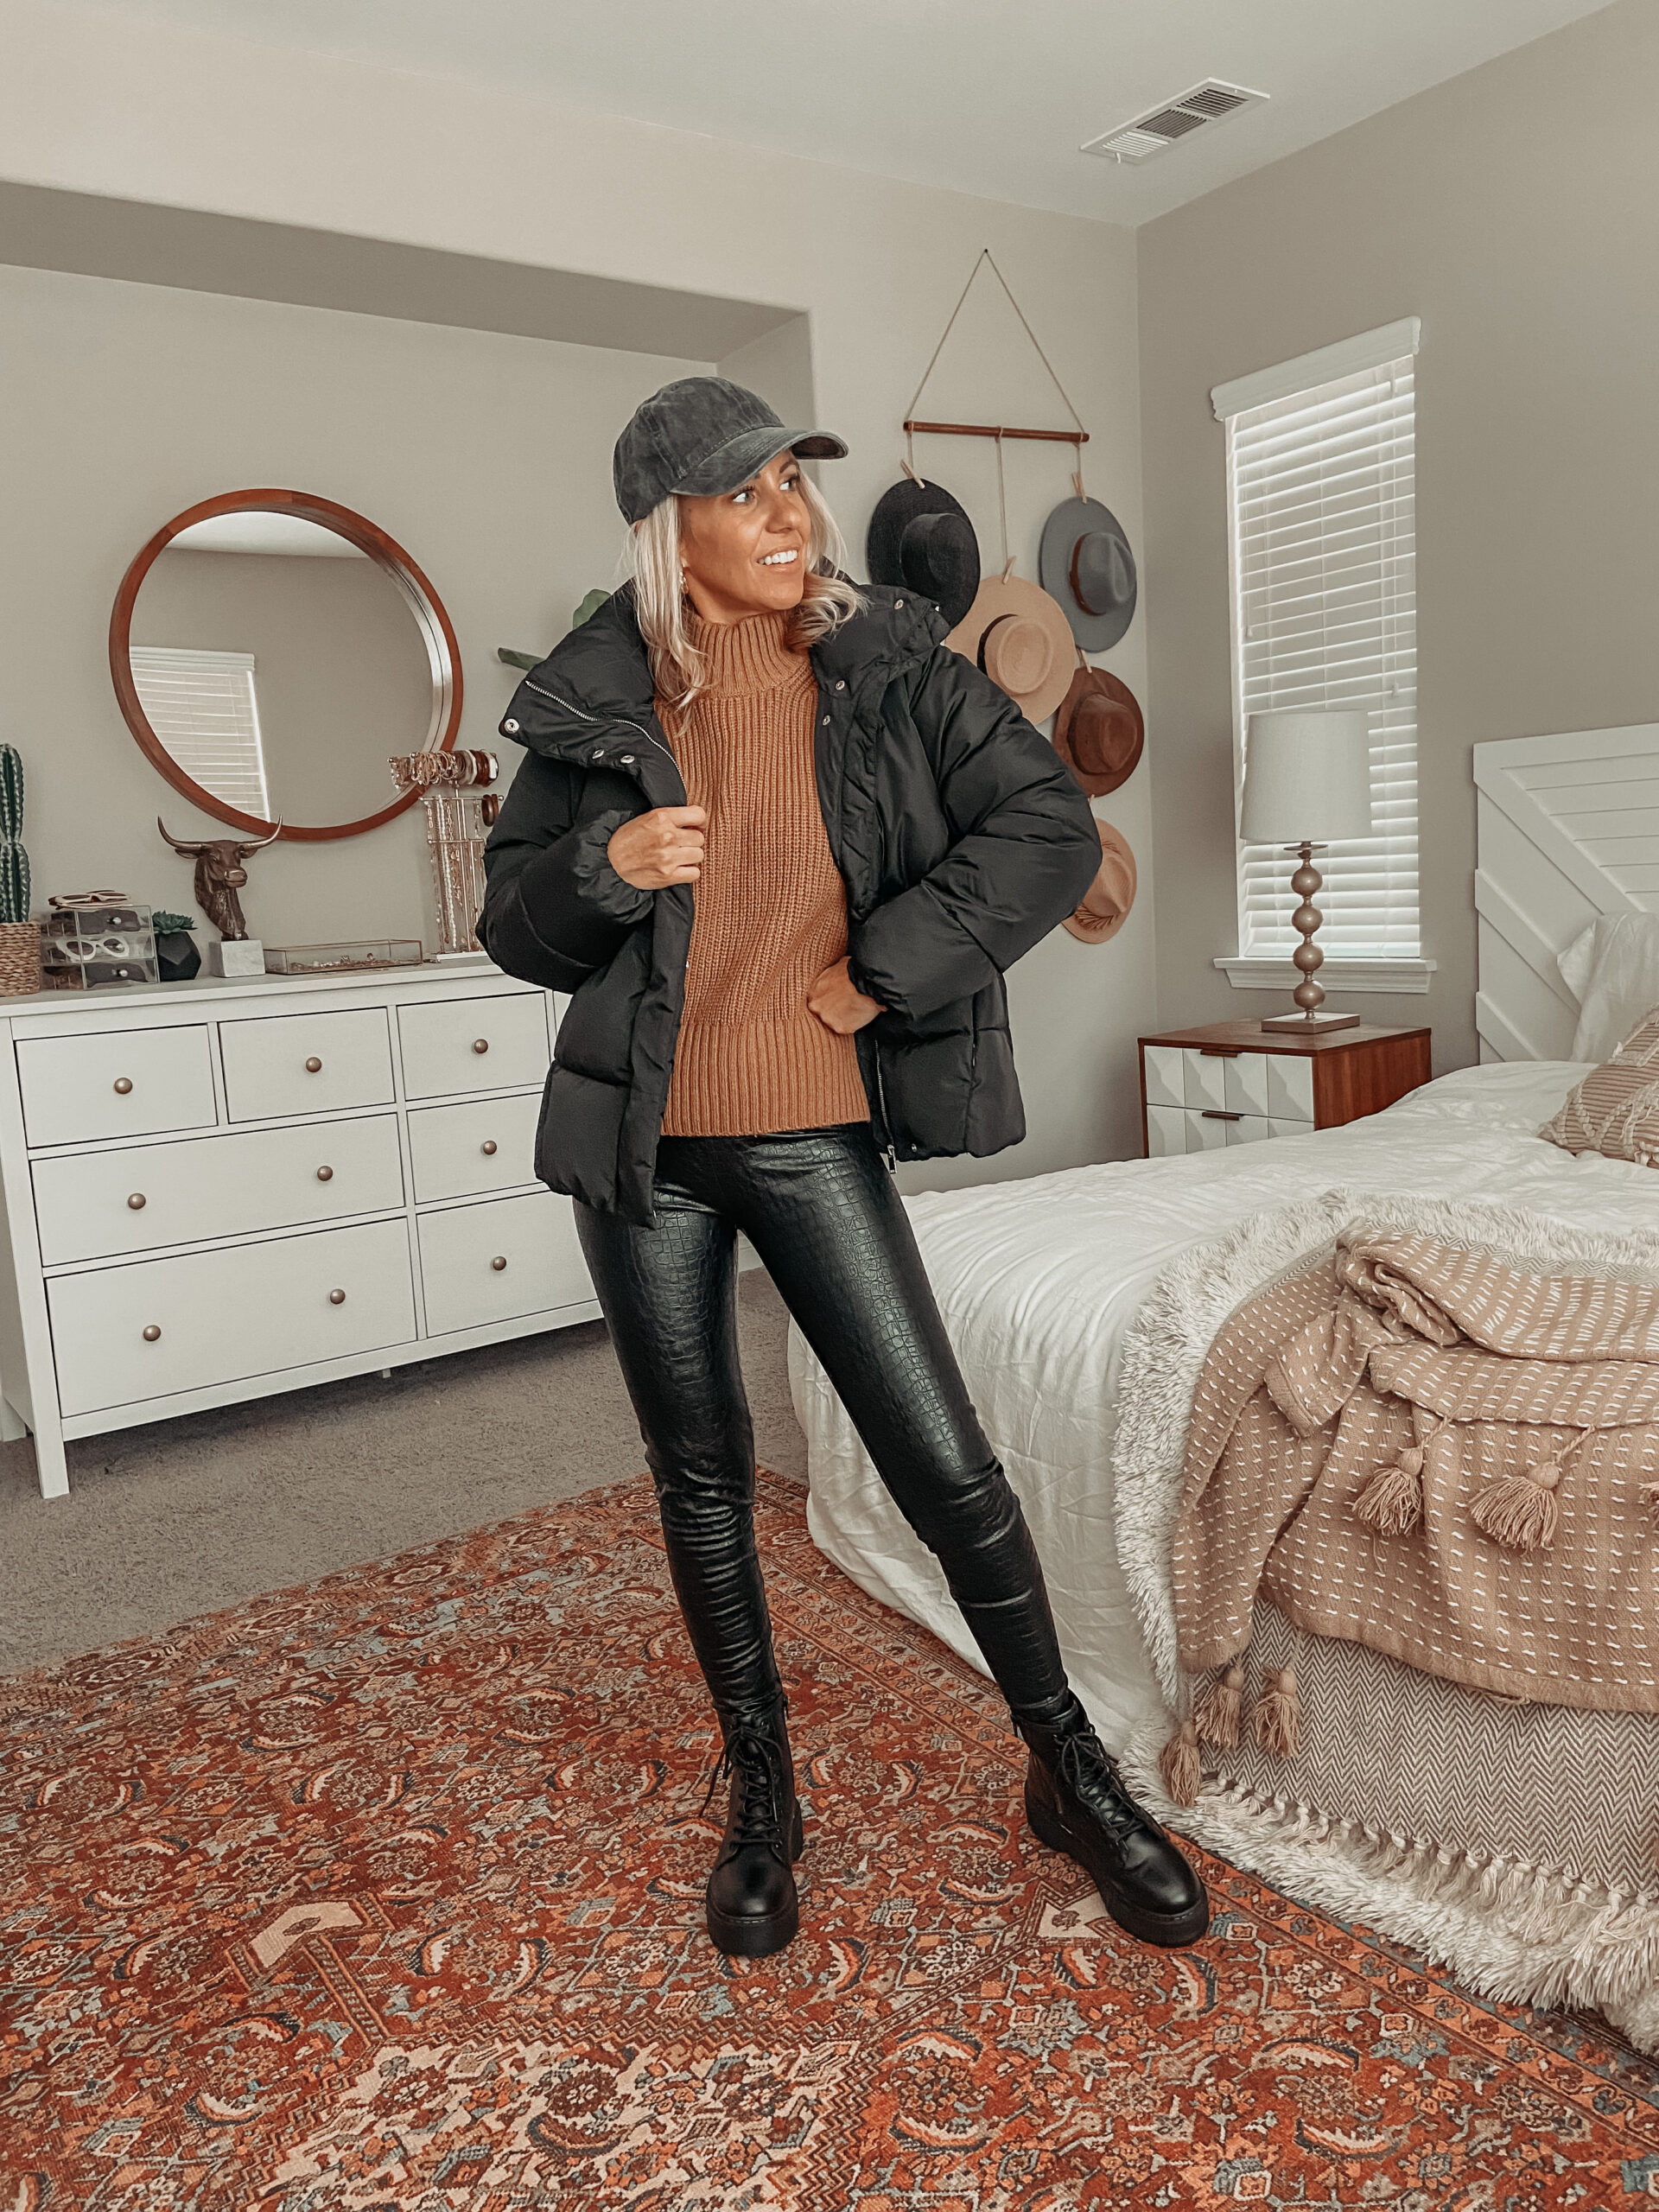 WINTER OUTFITS FROM WALMART: Jaclyn De Leon Style- sharing chic winter fits from Walmart. From casual + cozy to dresed up for a holiday party